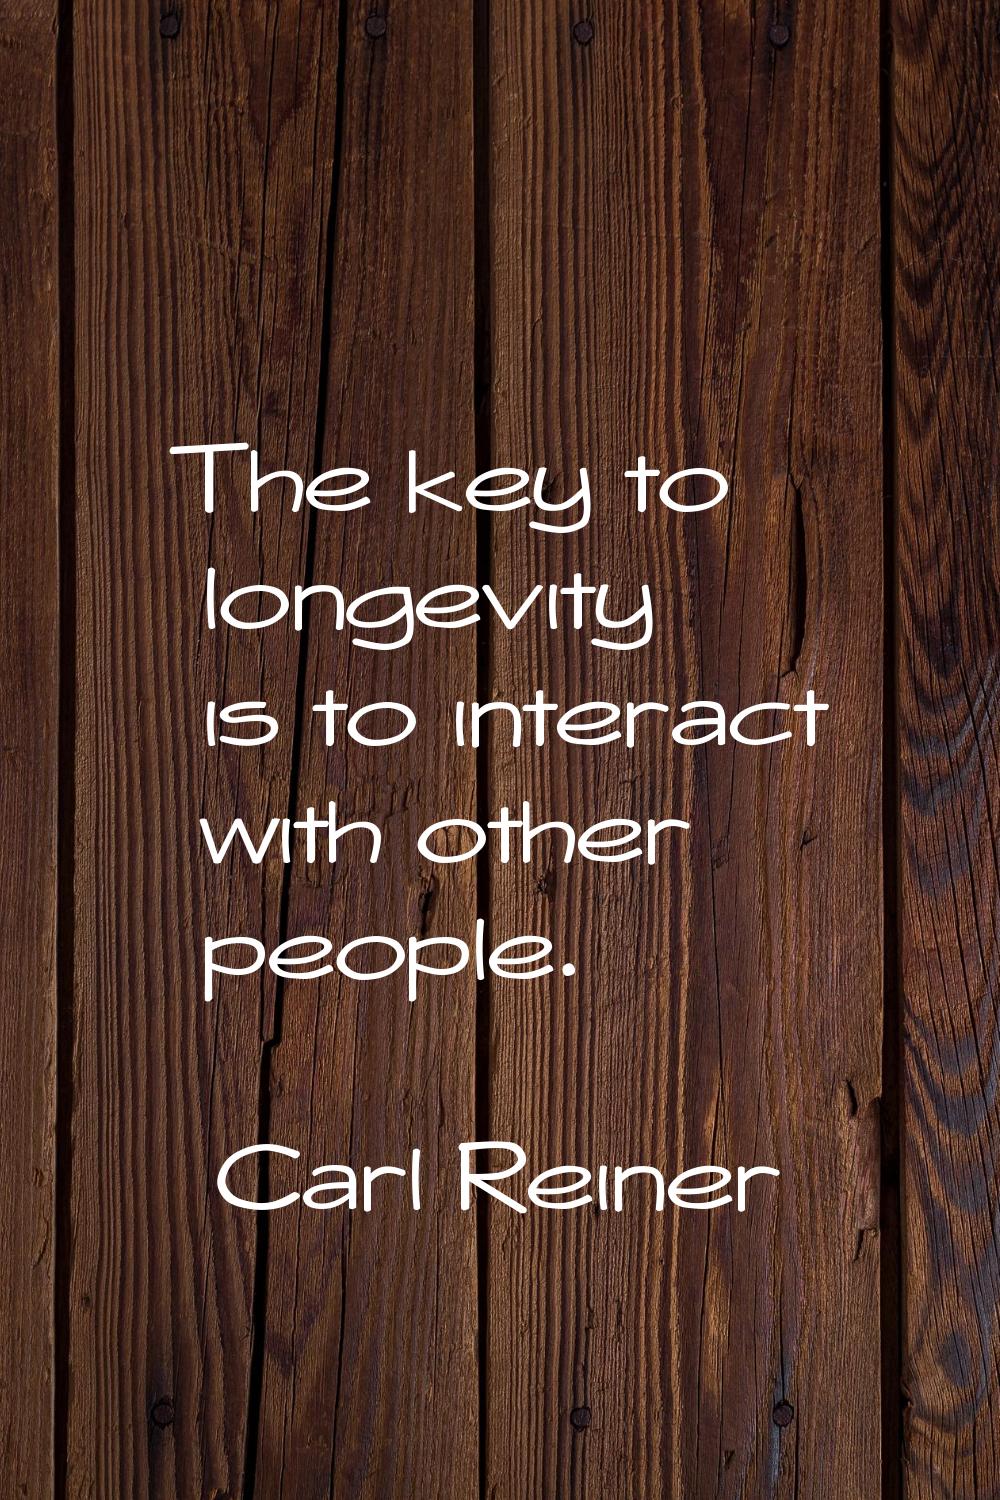 The key to longevity is to interact with other people.